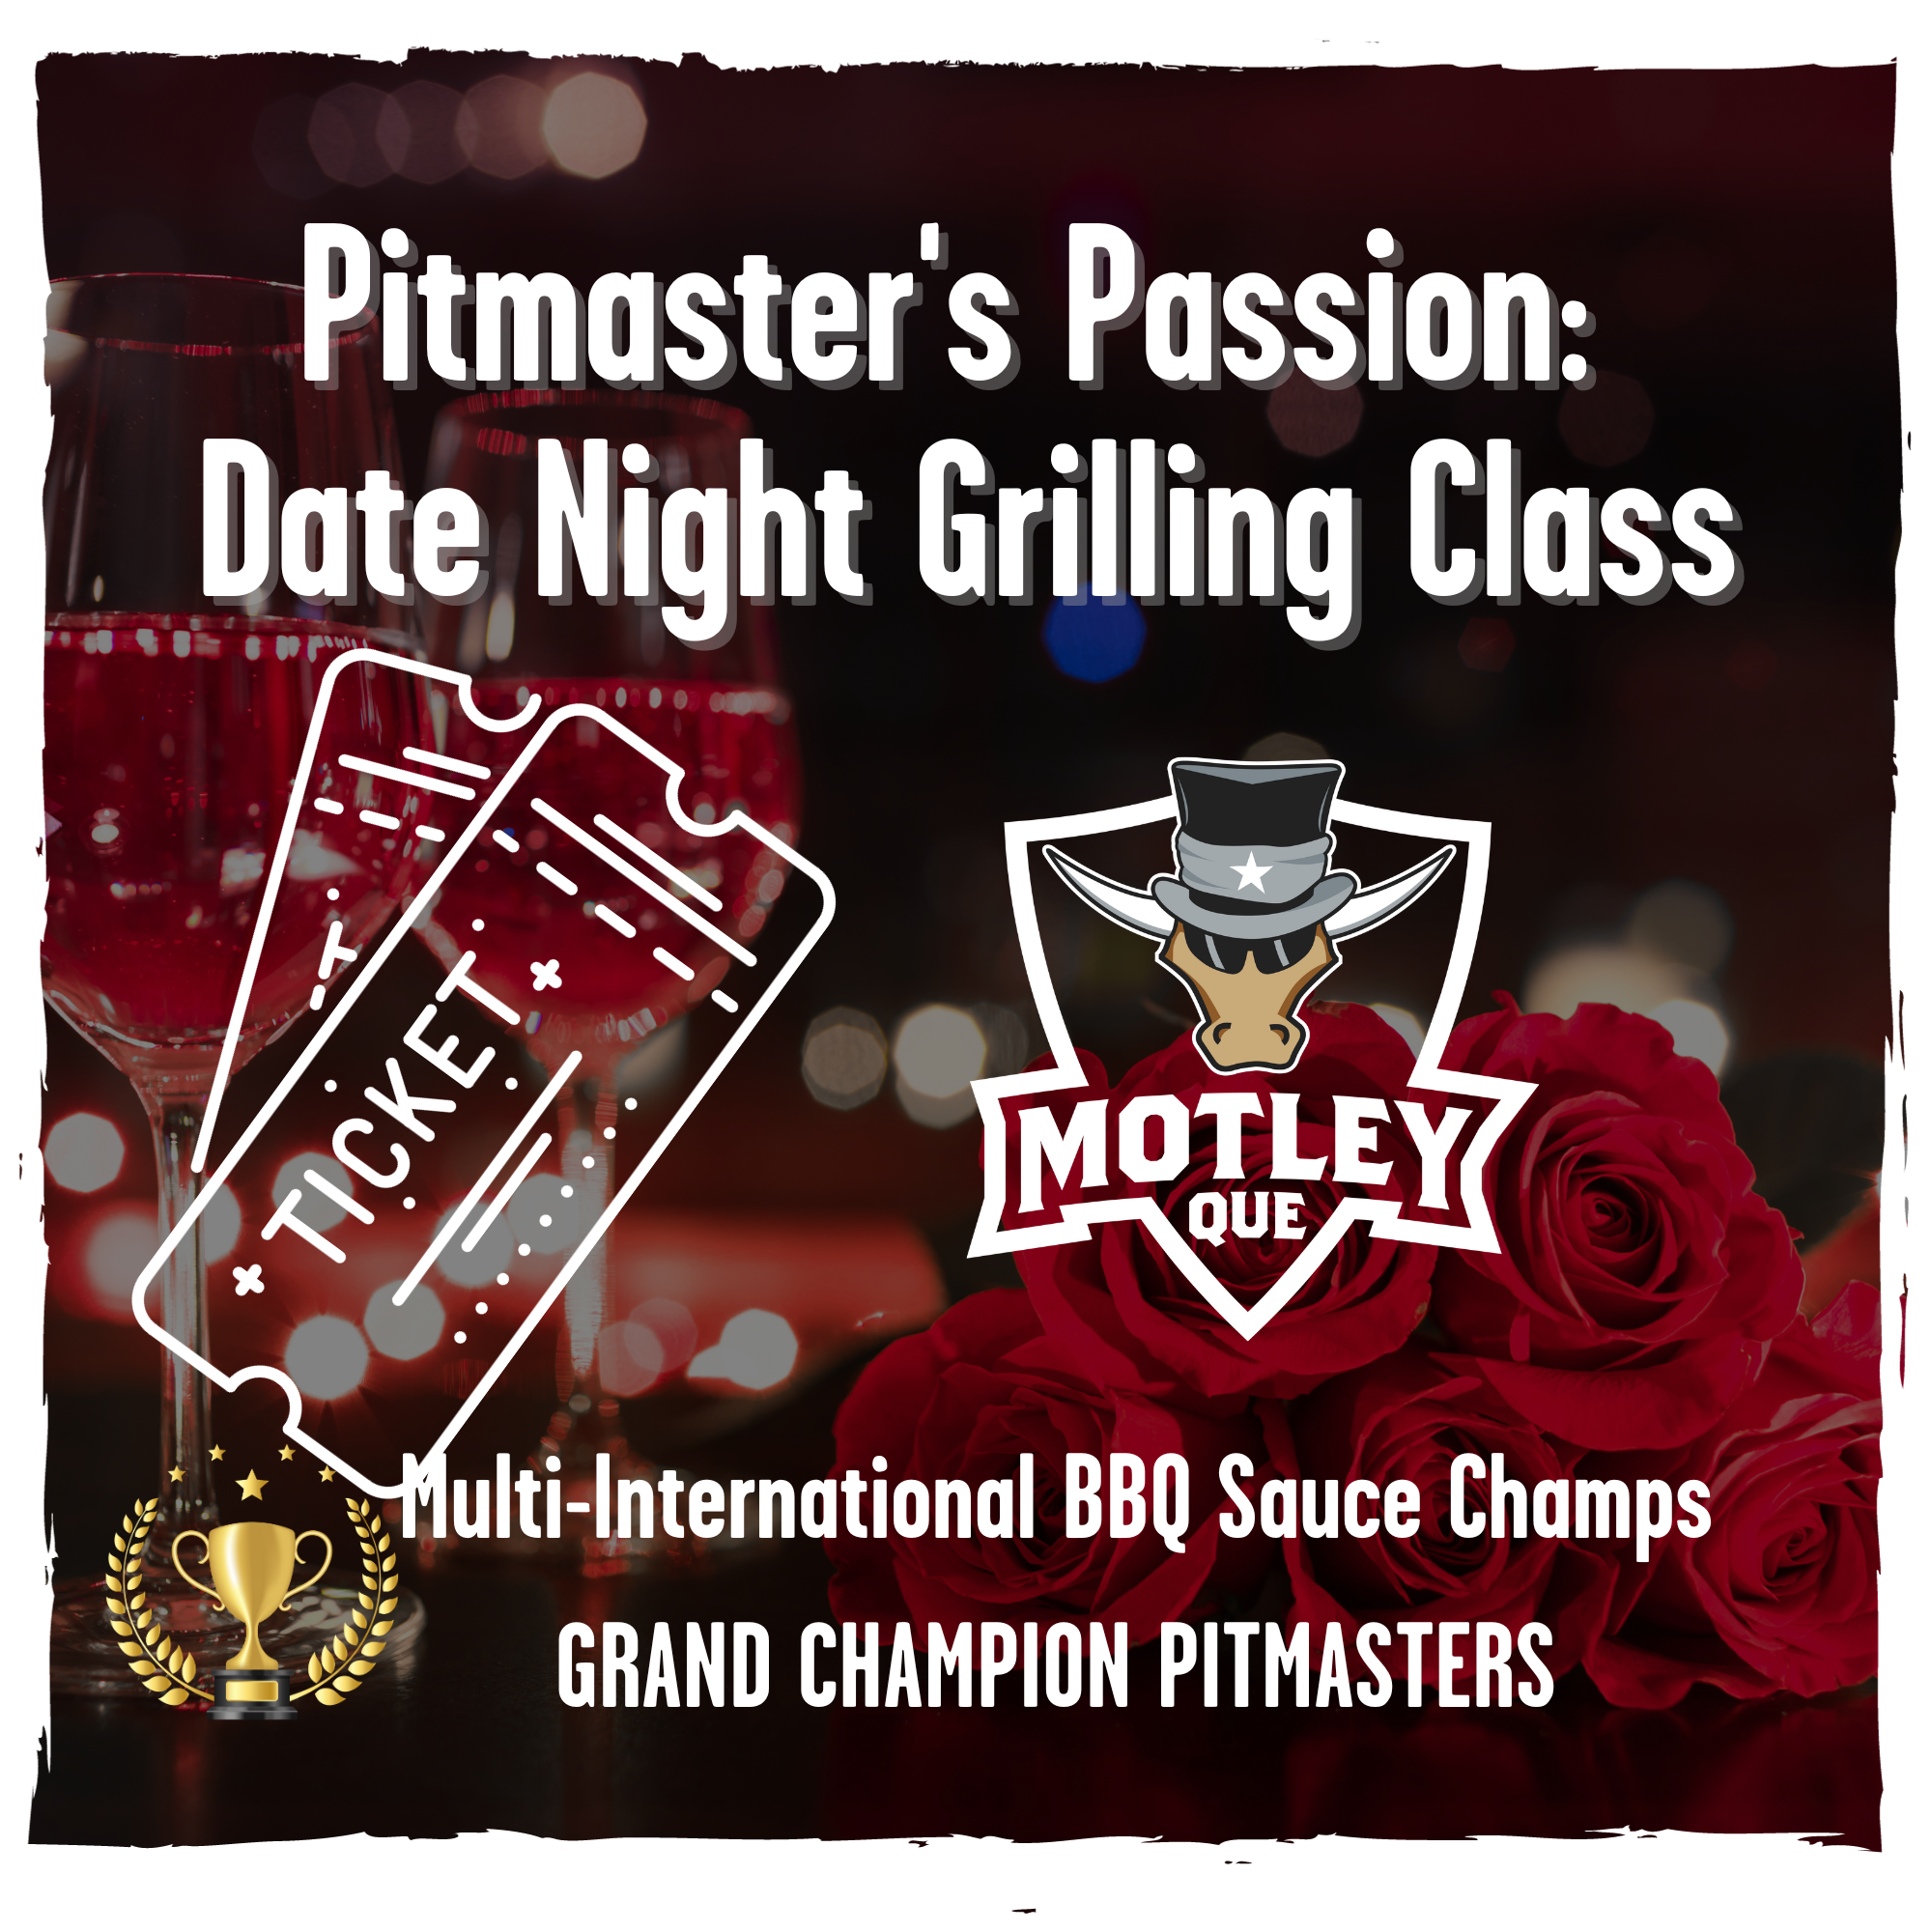 Pitmaster's Passion: Date Night Grilling Class Feb 7th